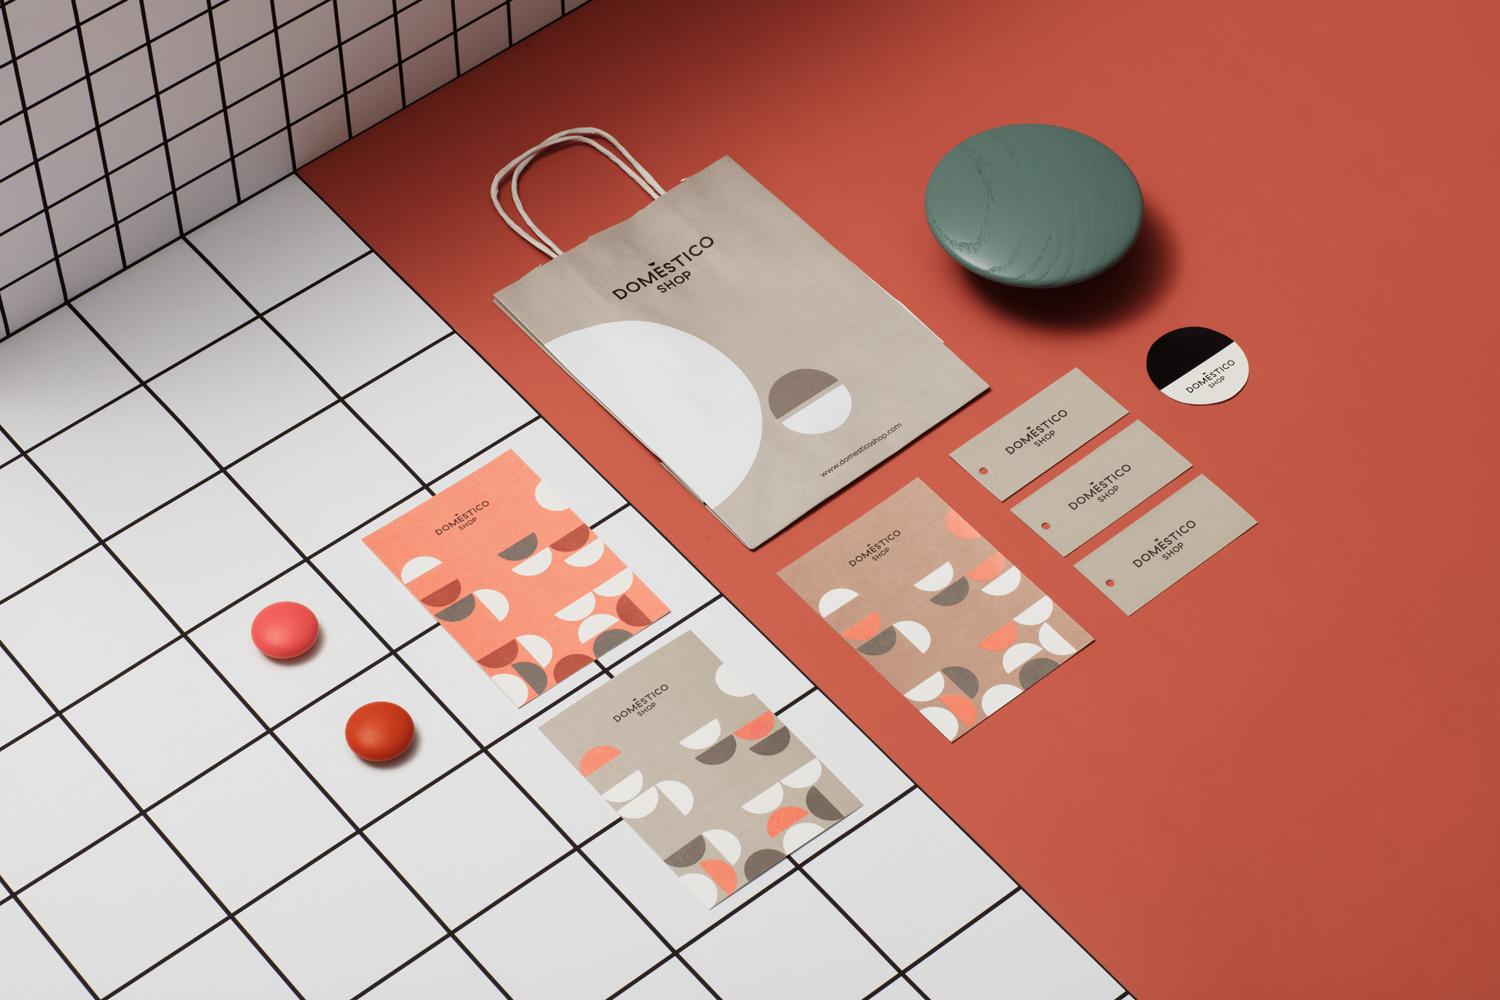 New graphic identity, including bags and tags, by Mucho for Spanish furniture retailer DomésticoShop